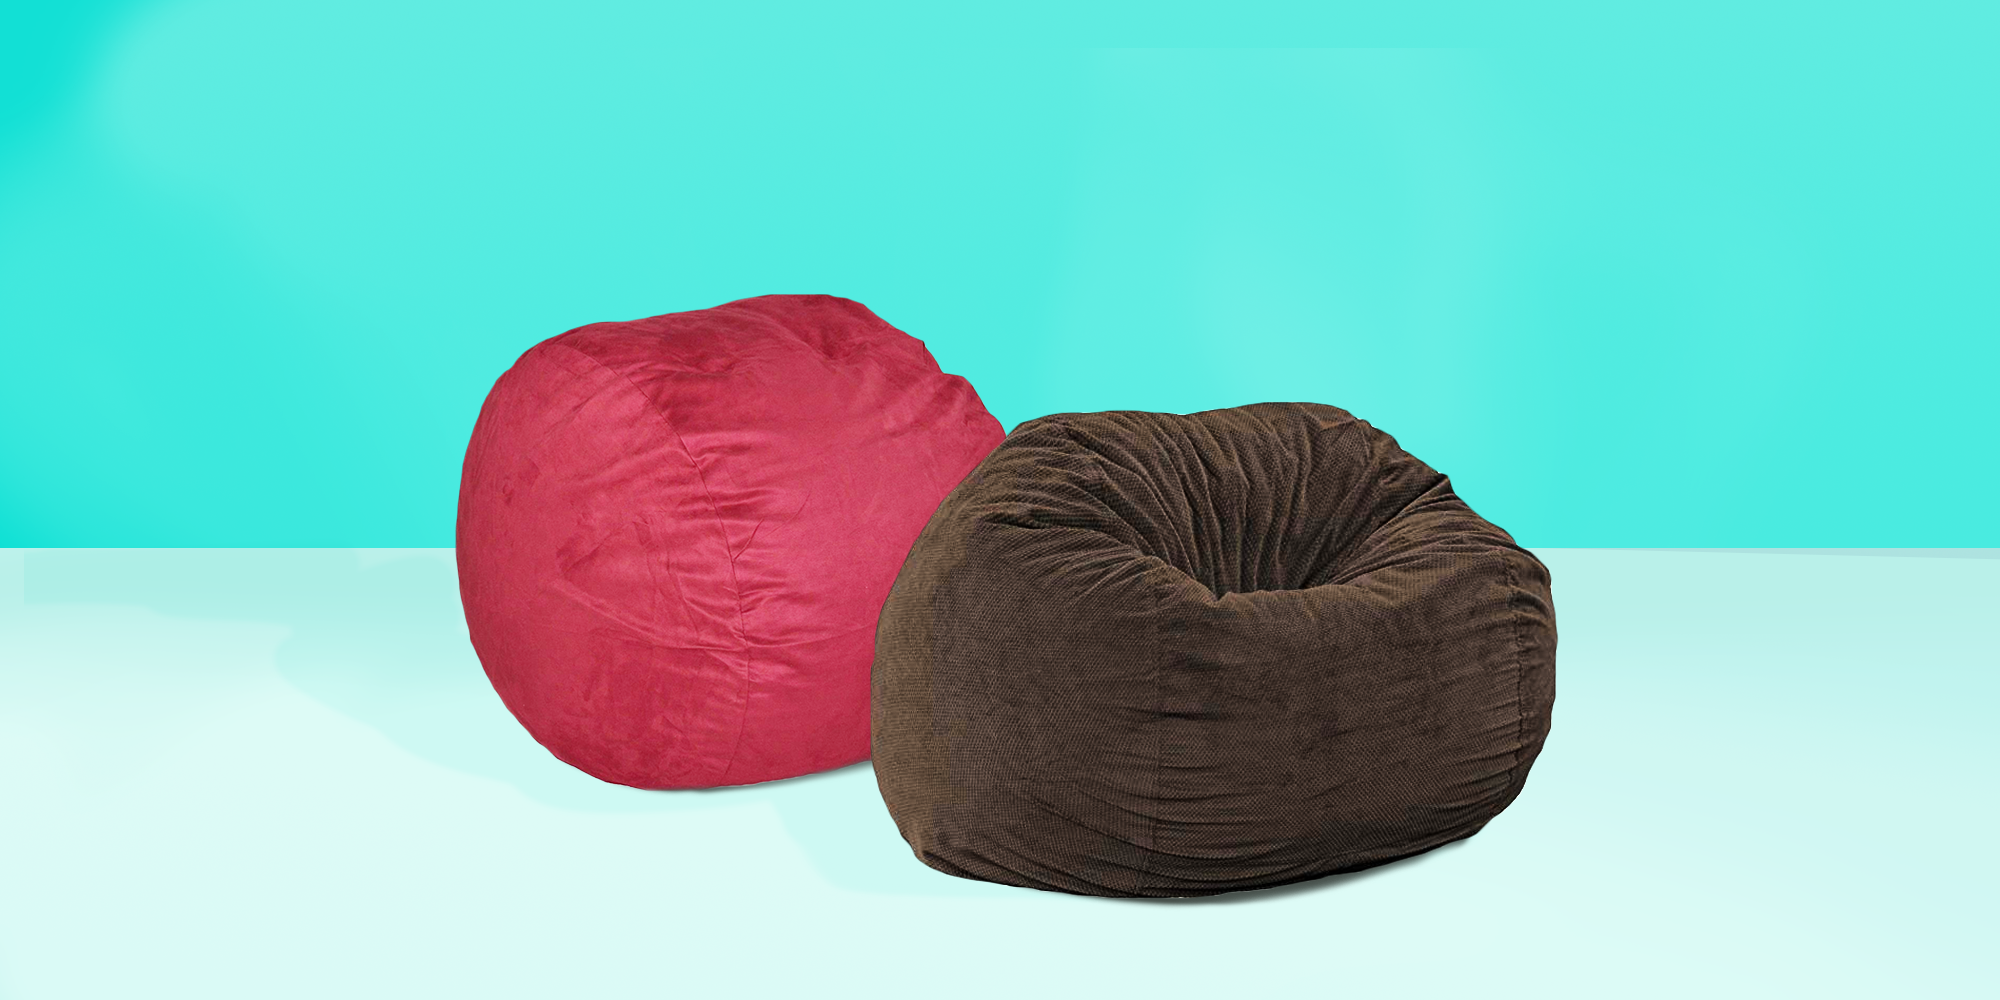 8 Best Bean Bag Chairs To Buy For Your Home